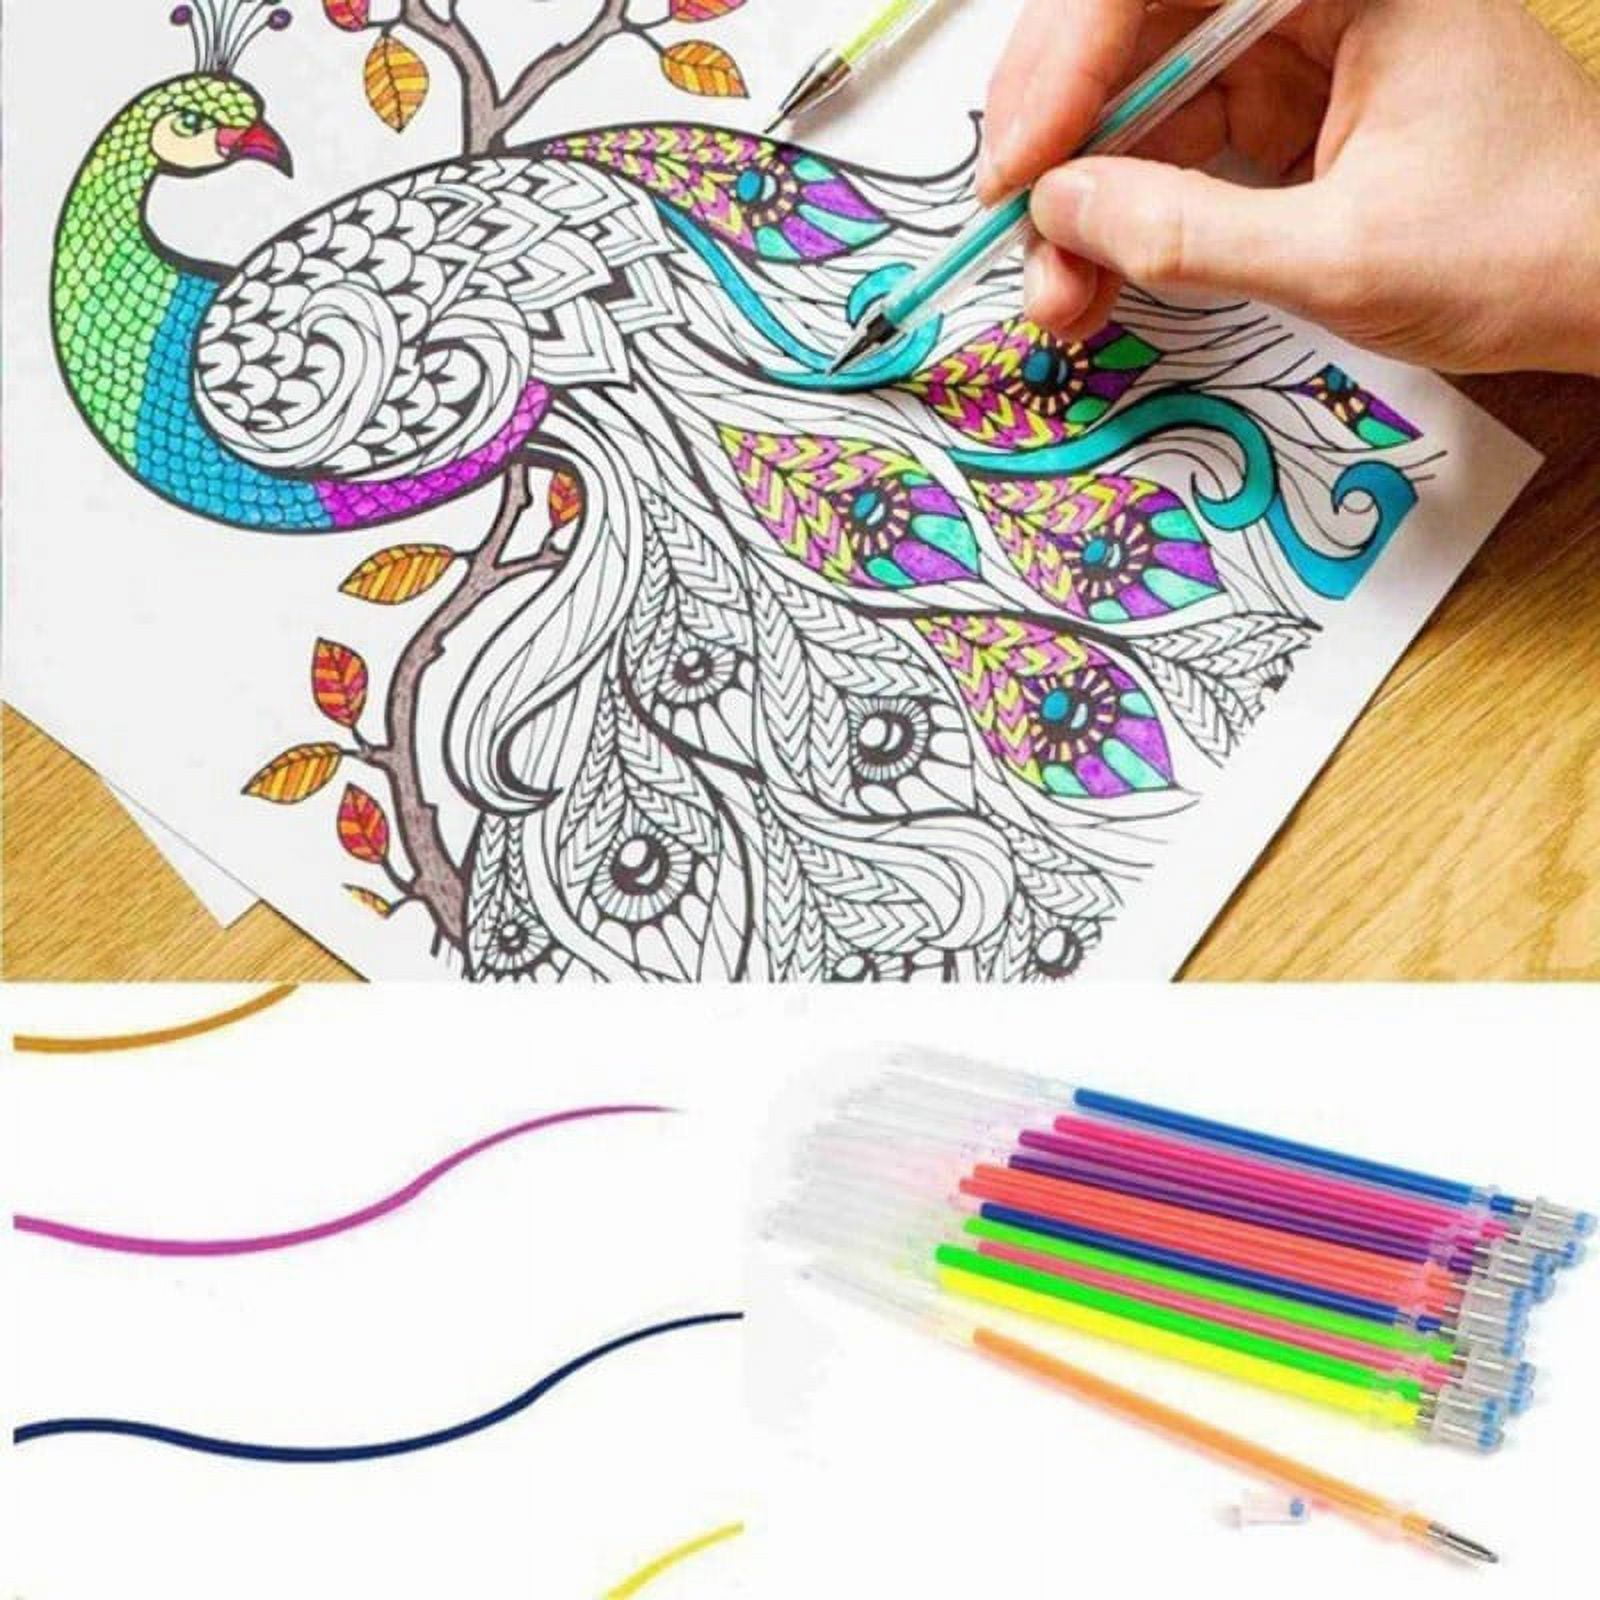 Clearance! 24/48 Pack Gel Pens Set Colored Gel Pen Fine Point Art Marker  Pens for Adult Coloring Books Kid Doodling Scrapbooking Drawing Writing  Sketching Highlighter Glitter Pens 